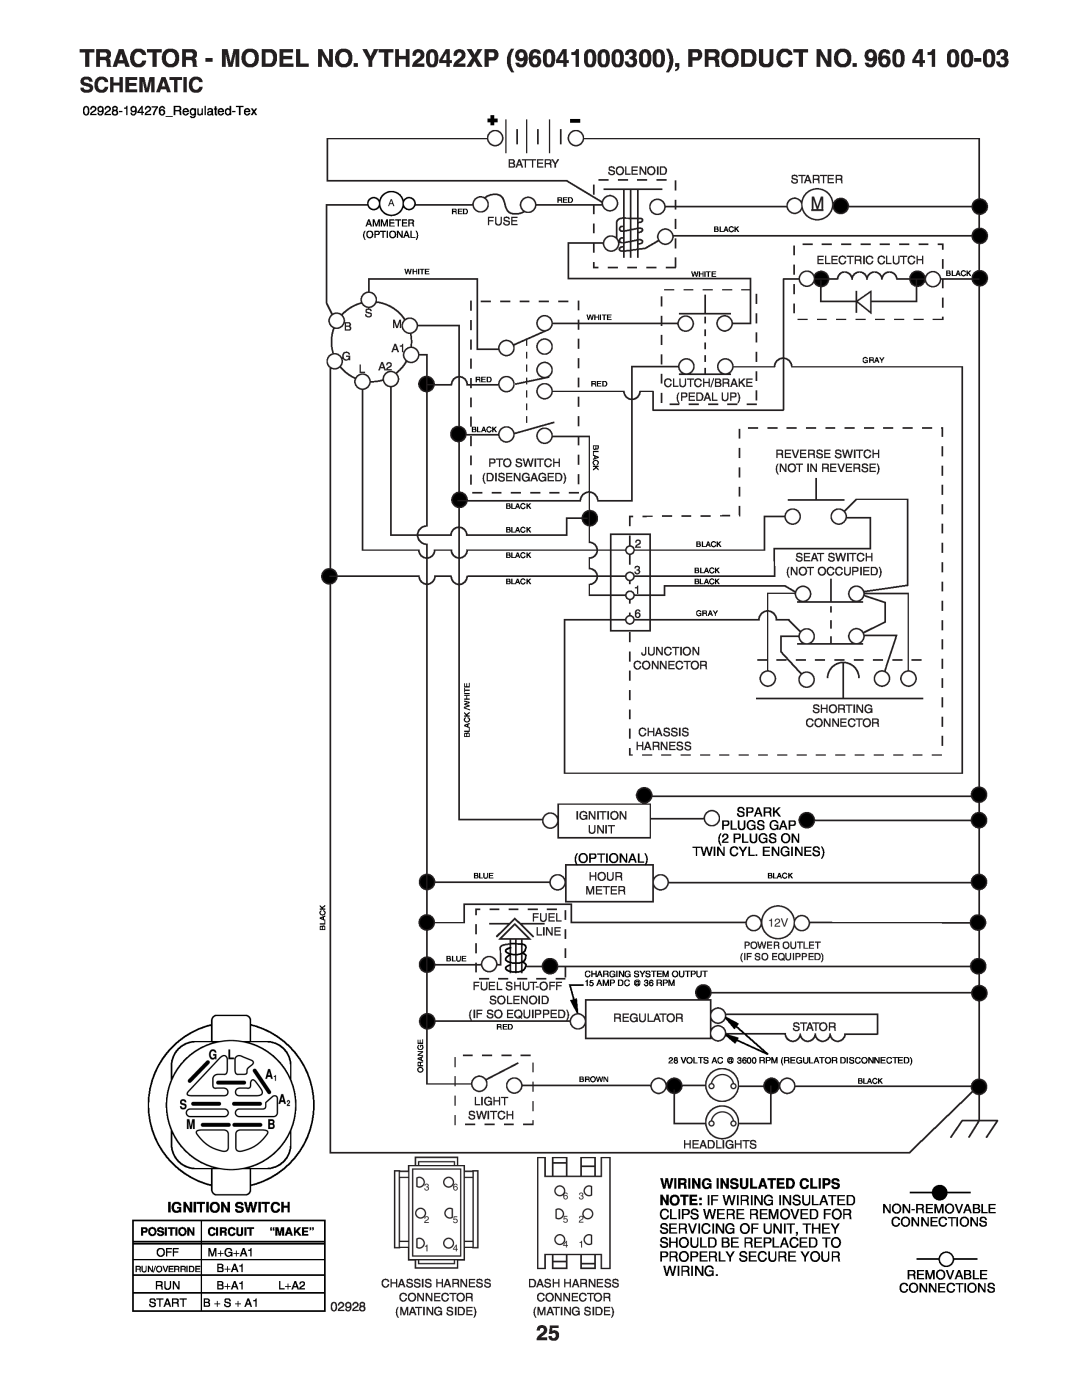 Husqvarna YTH2042XP owner manual Schematic, 02928-194276_Regulated-Tex, Optional, Connections, Removable, “Make” 